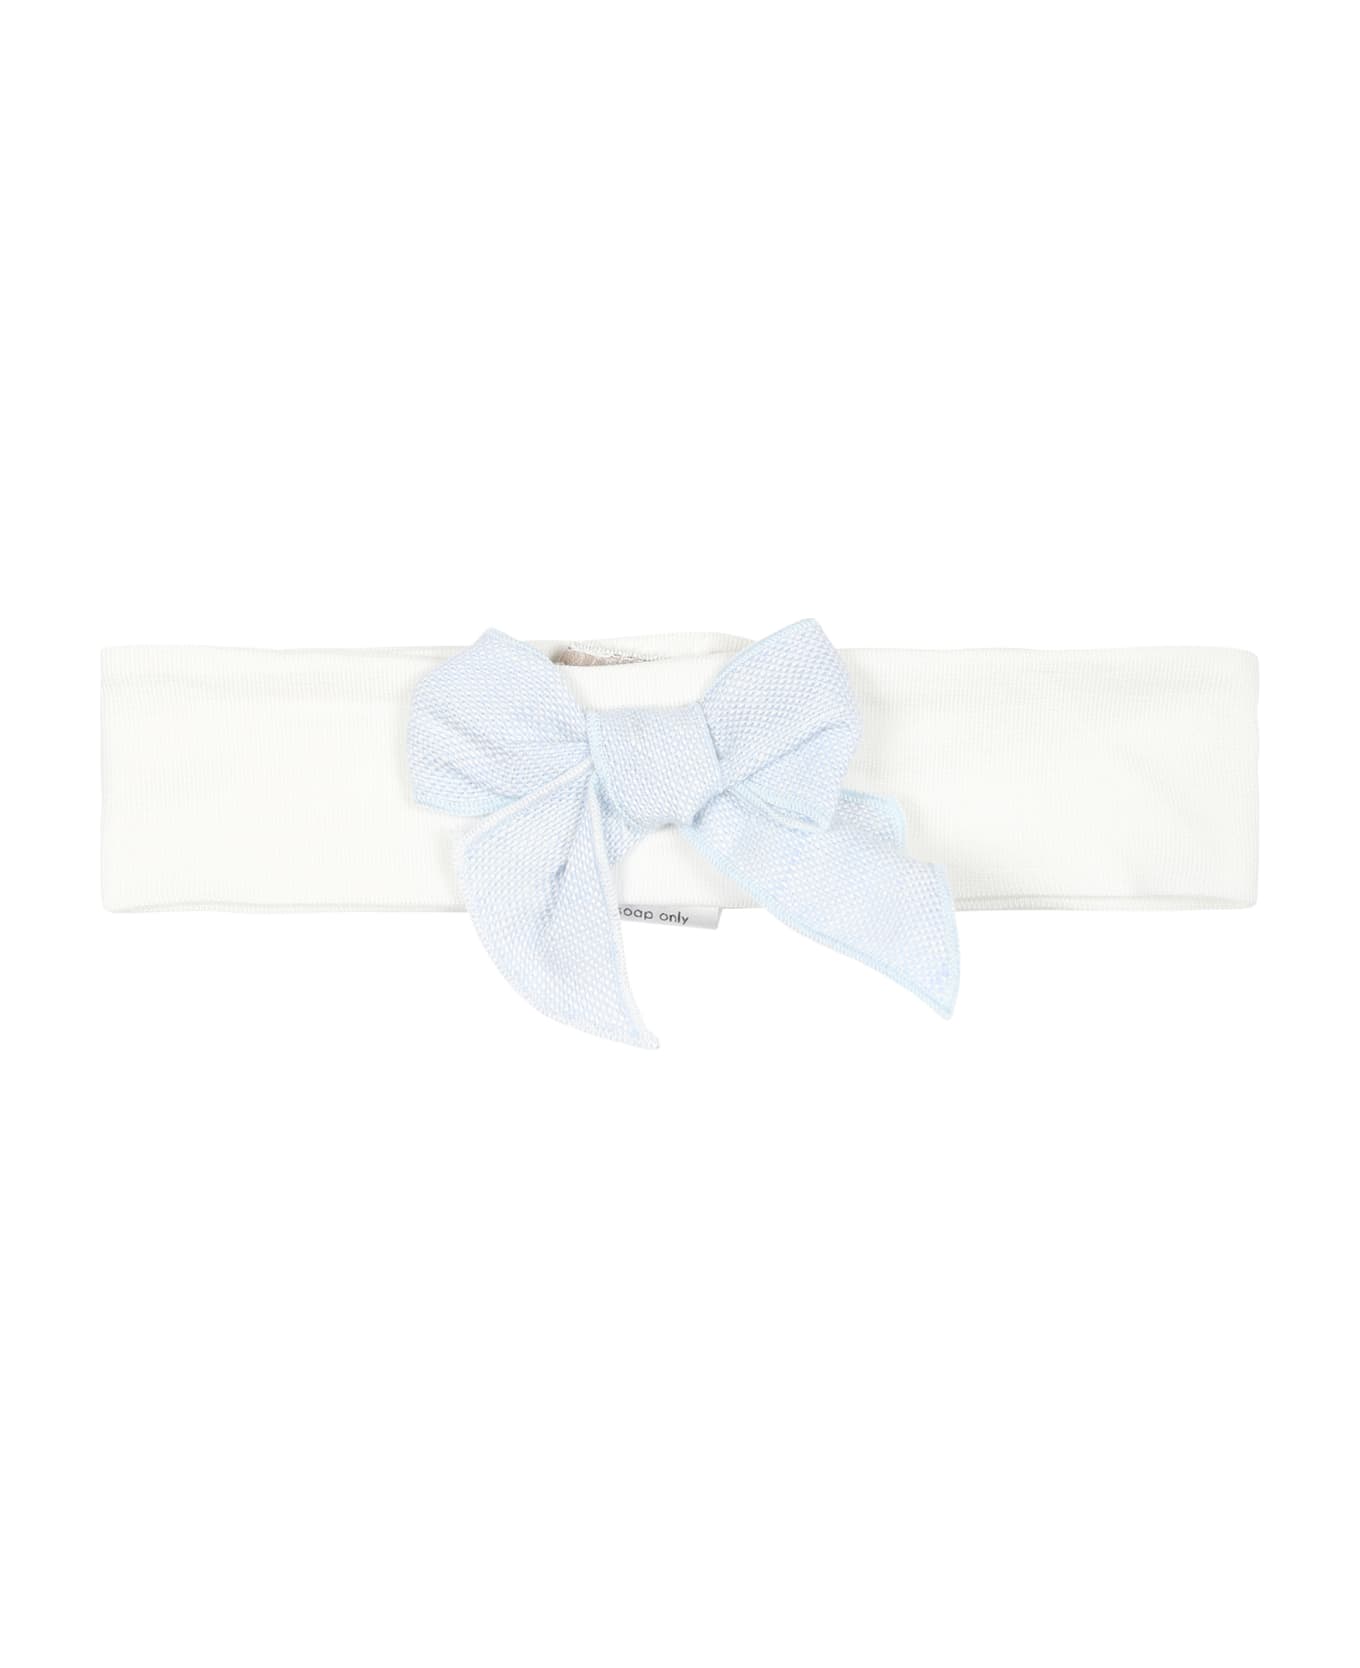 La stupenderia White Hair Band For Baby Girl With Light Blue Bow - White